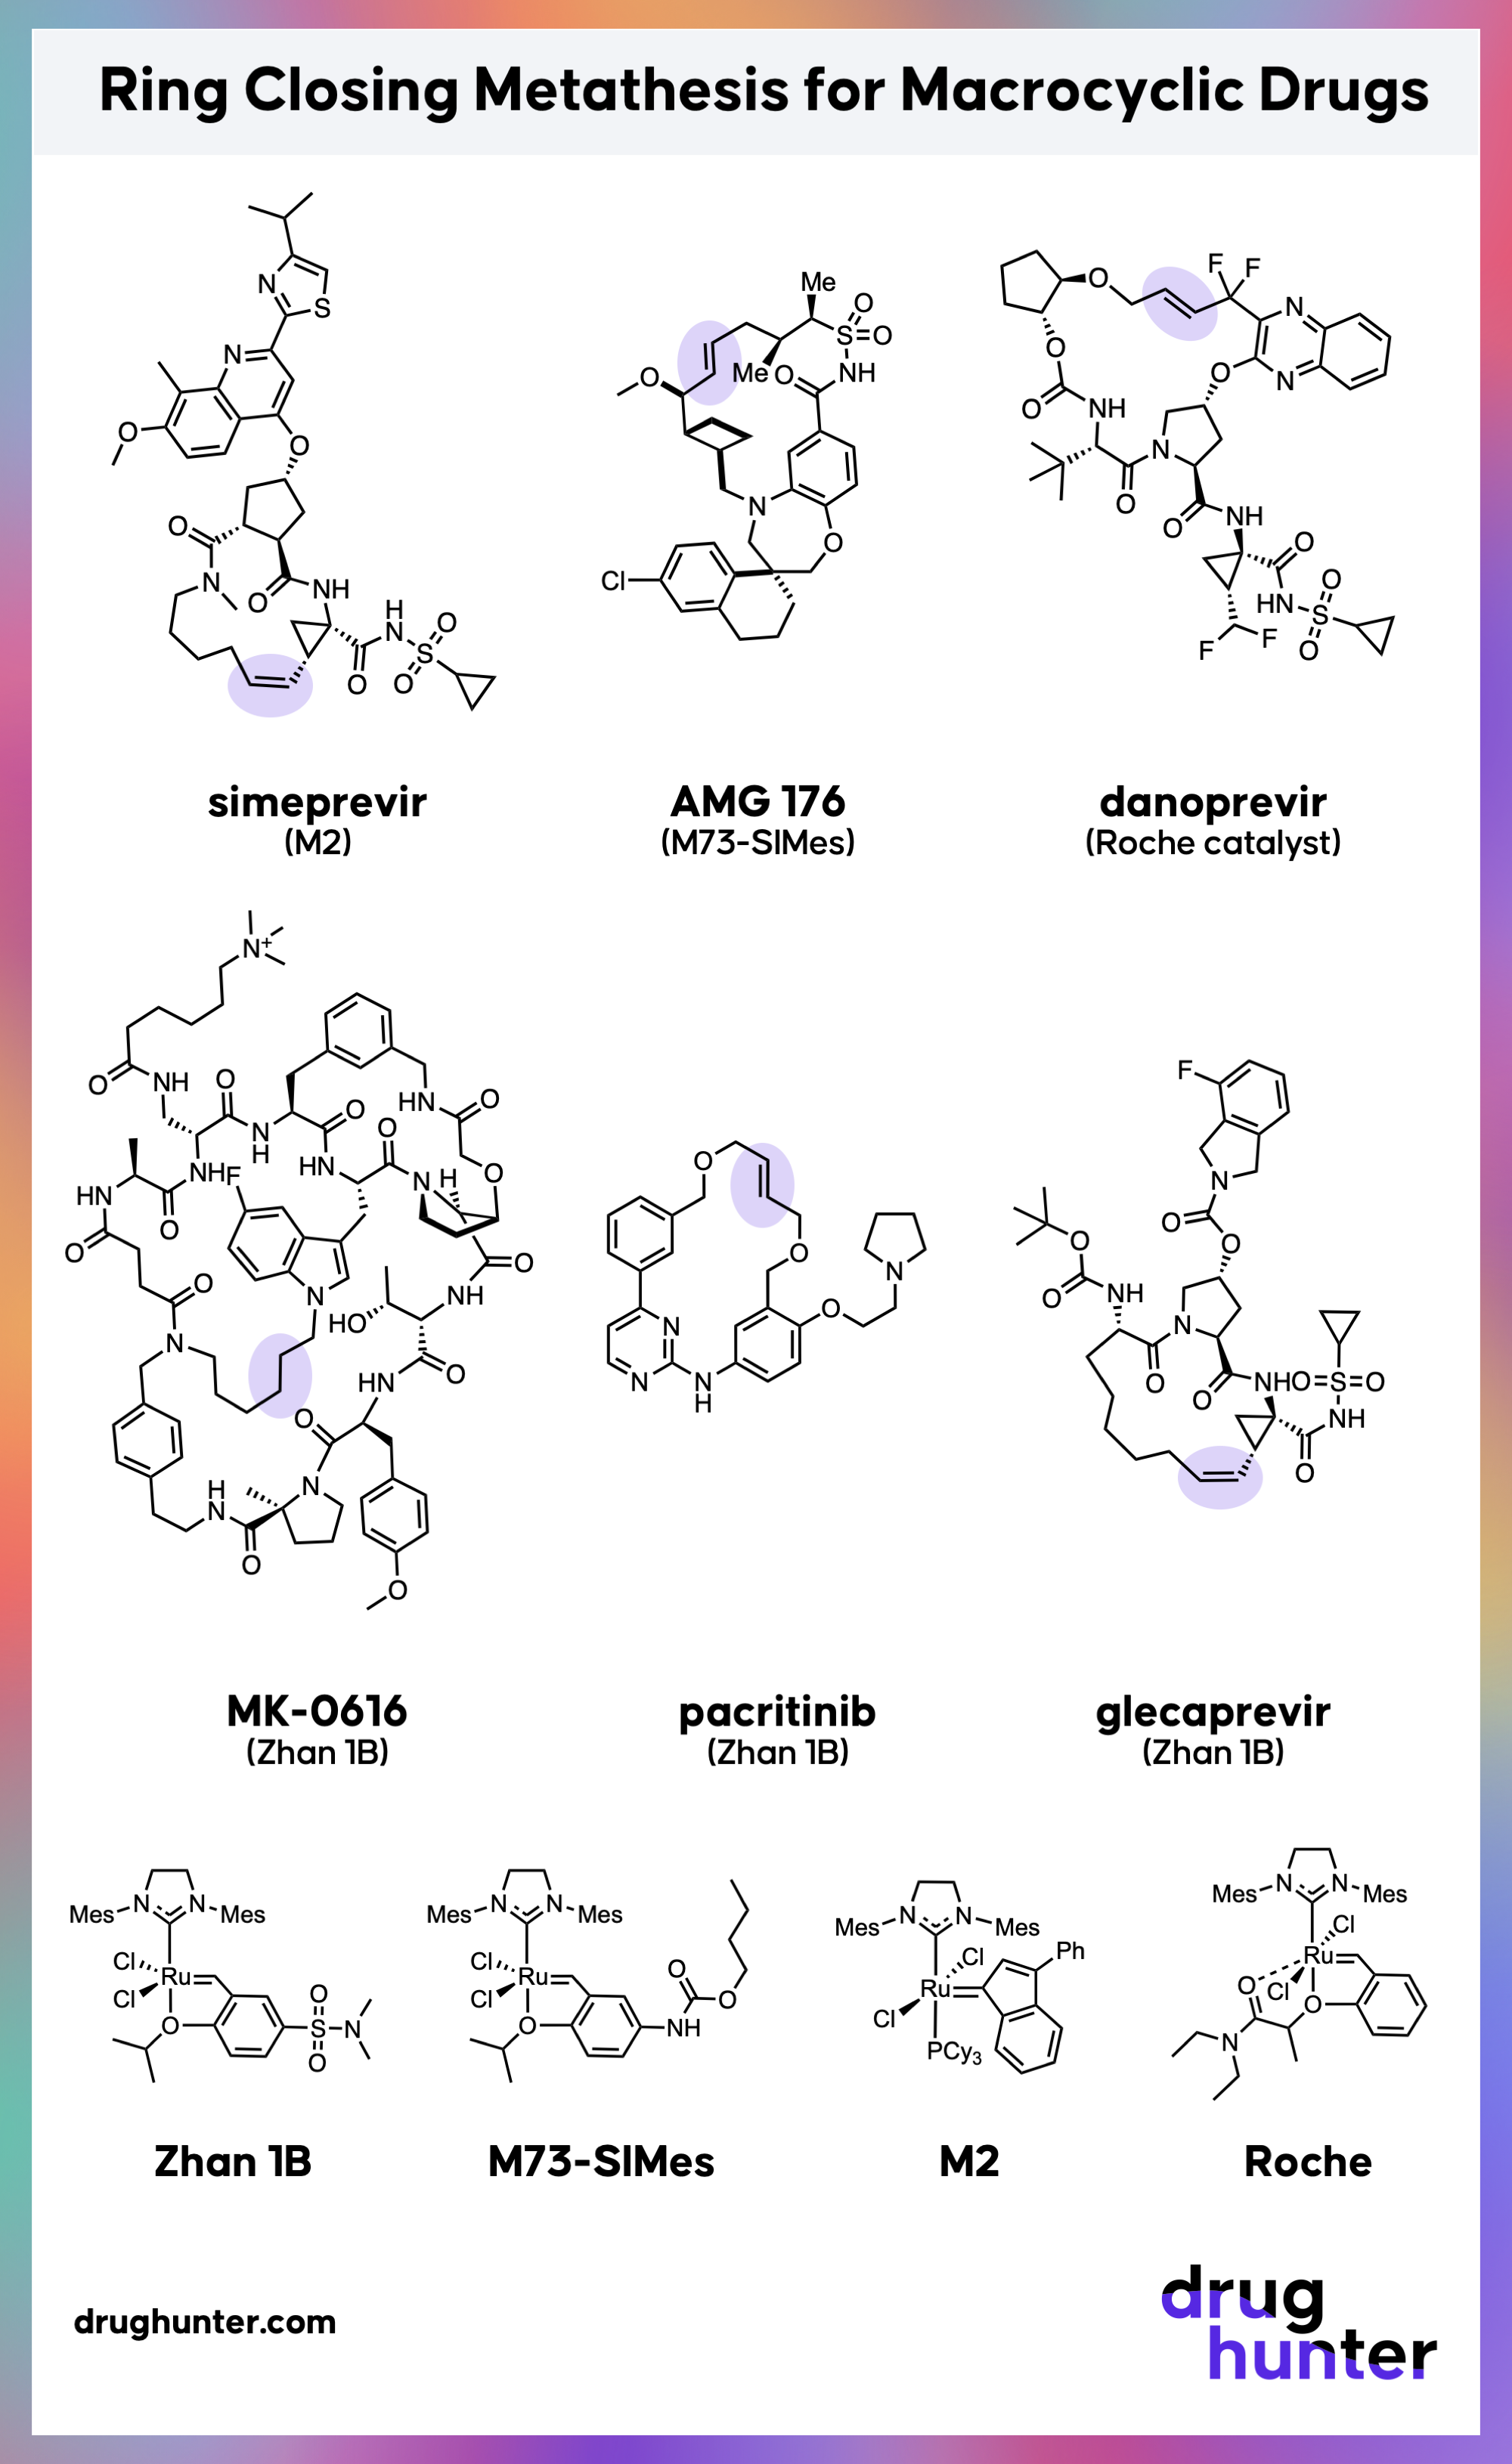 Sankaran GS and Balasubramaniam. An Overview on Ring Closing Metathesis  Reaction and its Applications. J Agri Res 2018, 3(10): 0